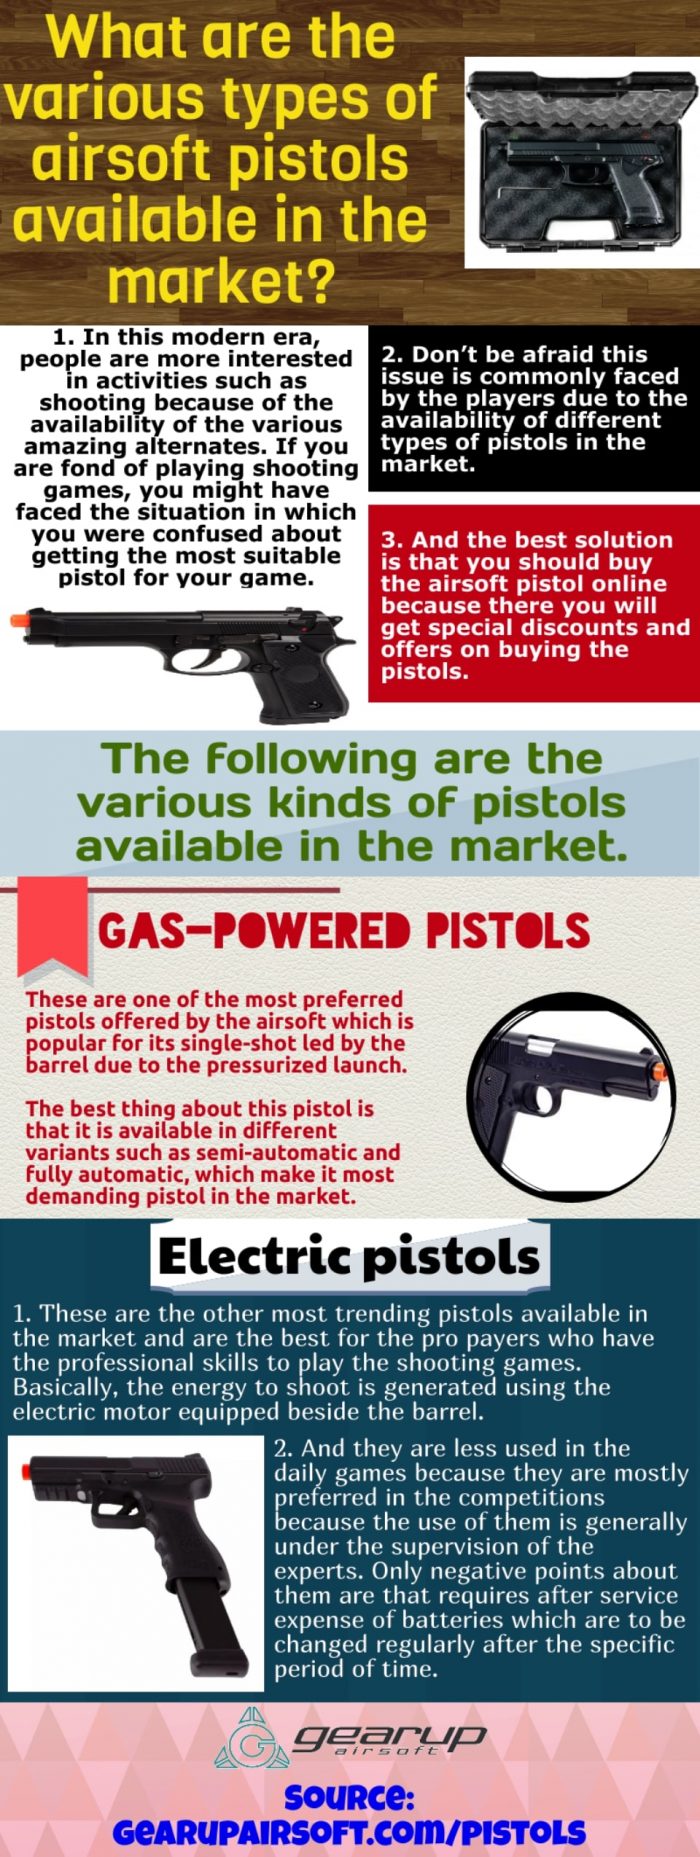 Airsoft pistol is small but can be highly protective